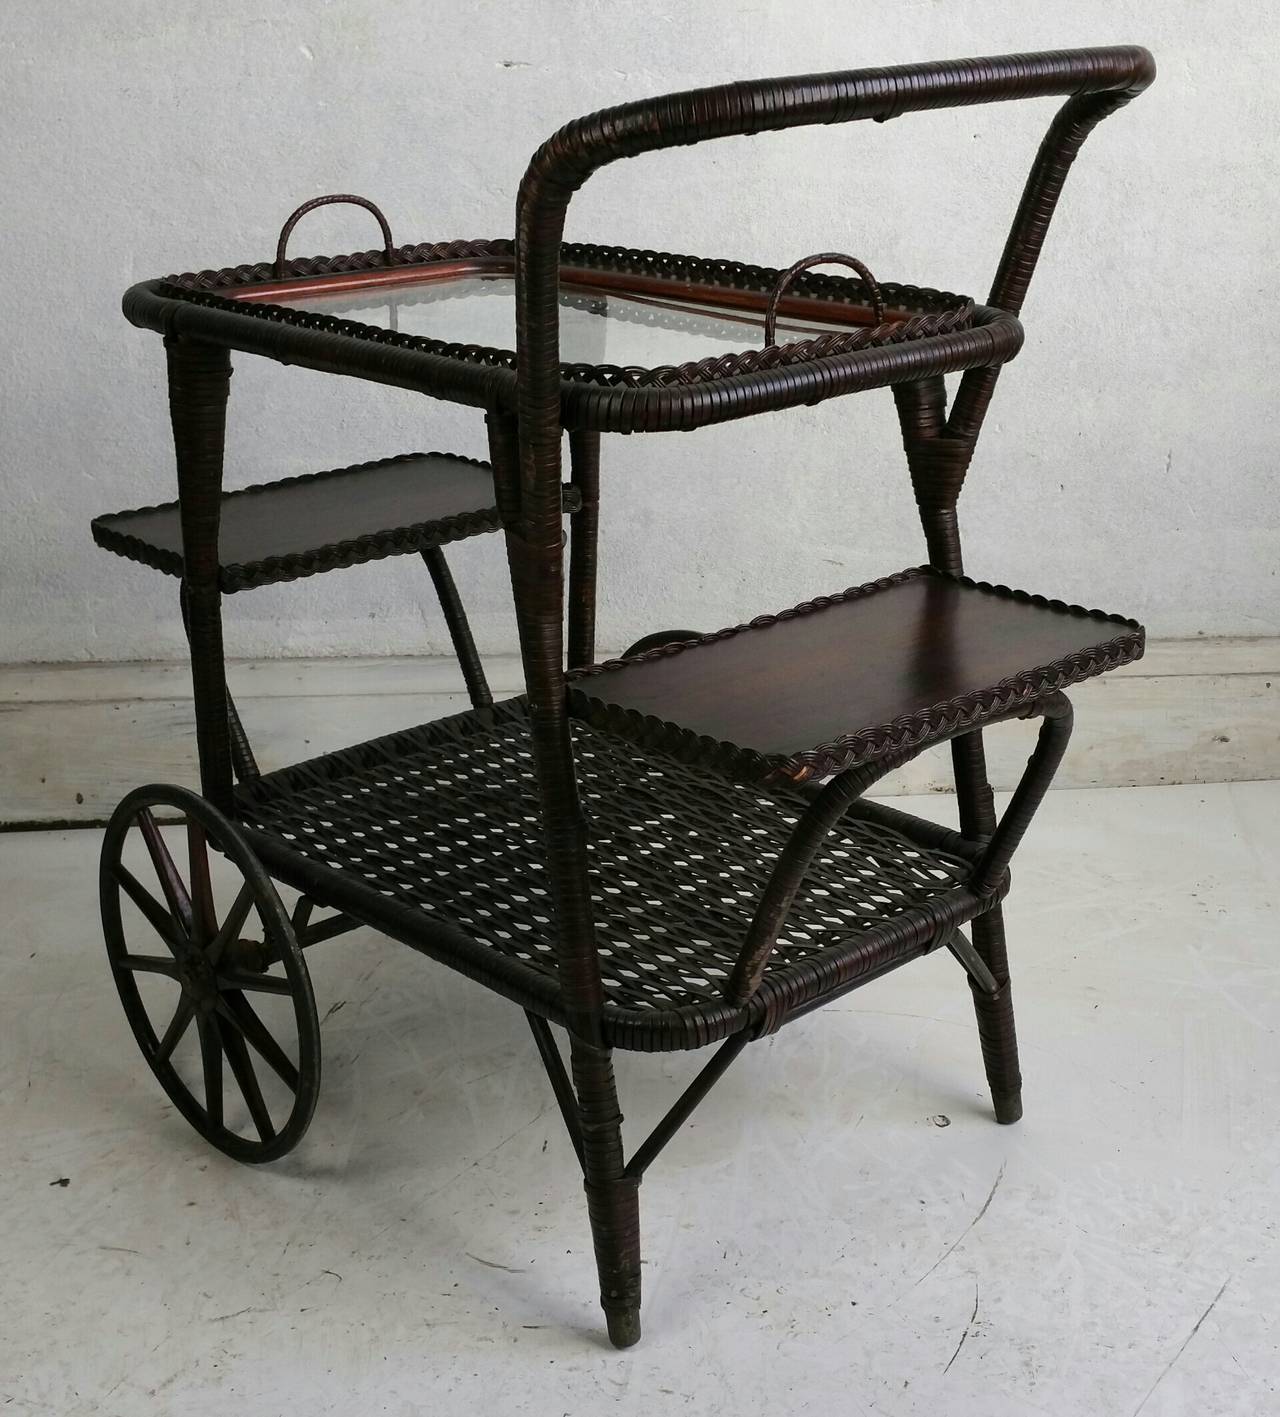 Caning Modernist Wicker Tea Trolly or Bar Cart, Early 1900s